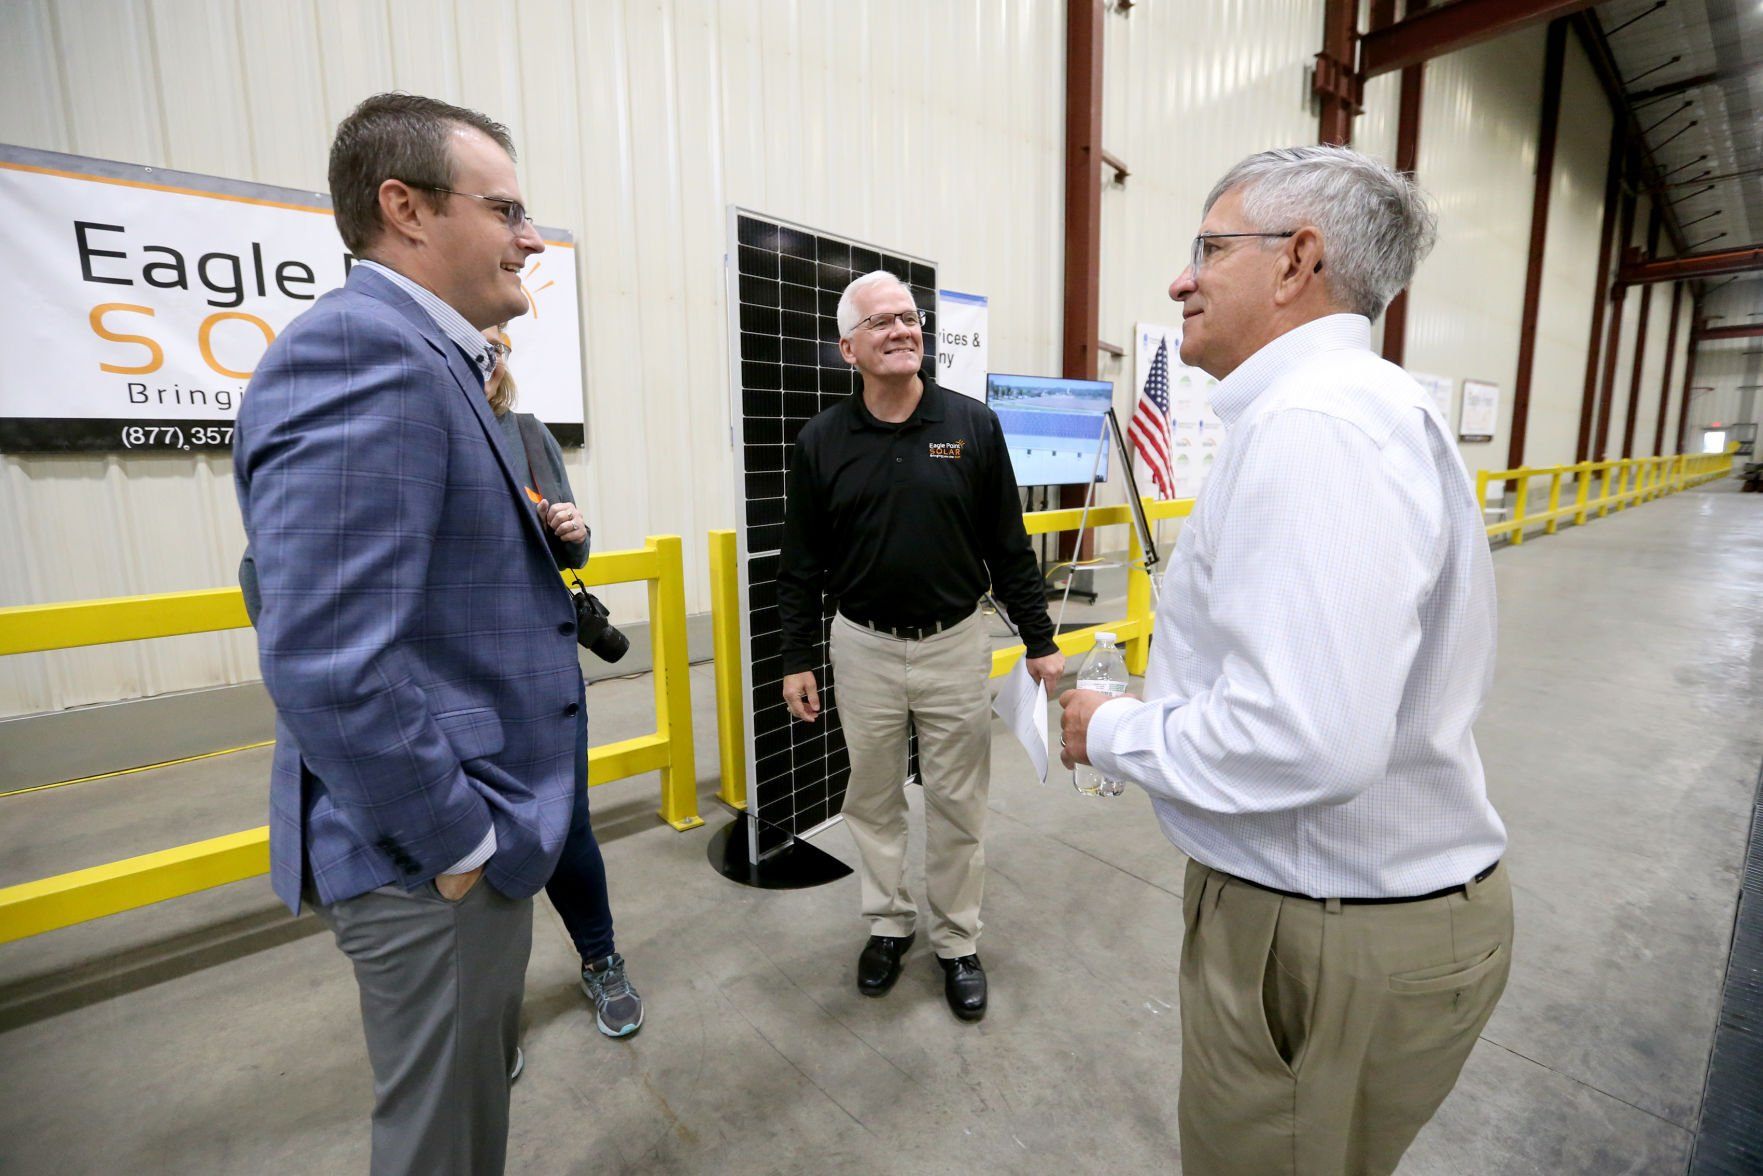 Iowa Lt. Gov. Adam Gregg (from left); Larry Steffen, executive vice president of sales and marketing at Eagle Point Solar; and Dave Buchheit, vice president of operations at FarmTek, talk during an event at FarmTek in Dyersville, Iowa, on Wednesday, Nov. 10, 2021.    PHOTO CREDIT: JESSICA REILLY